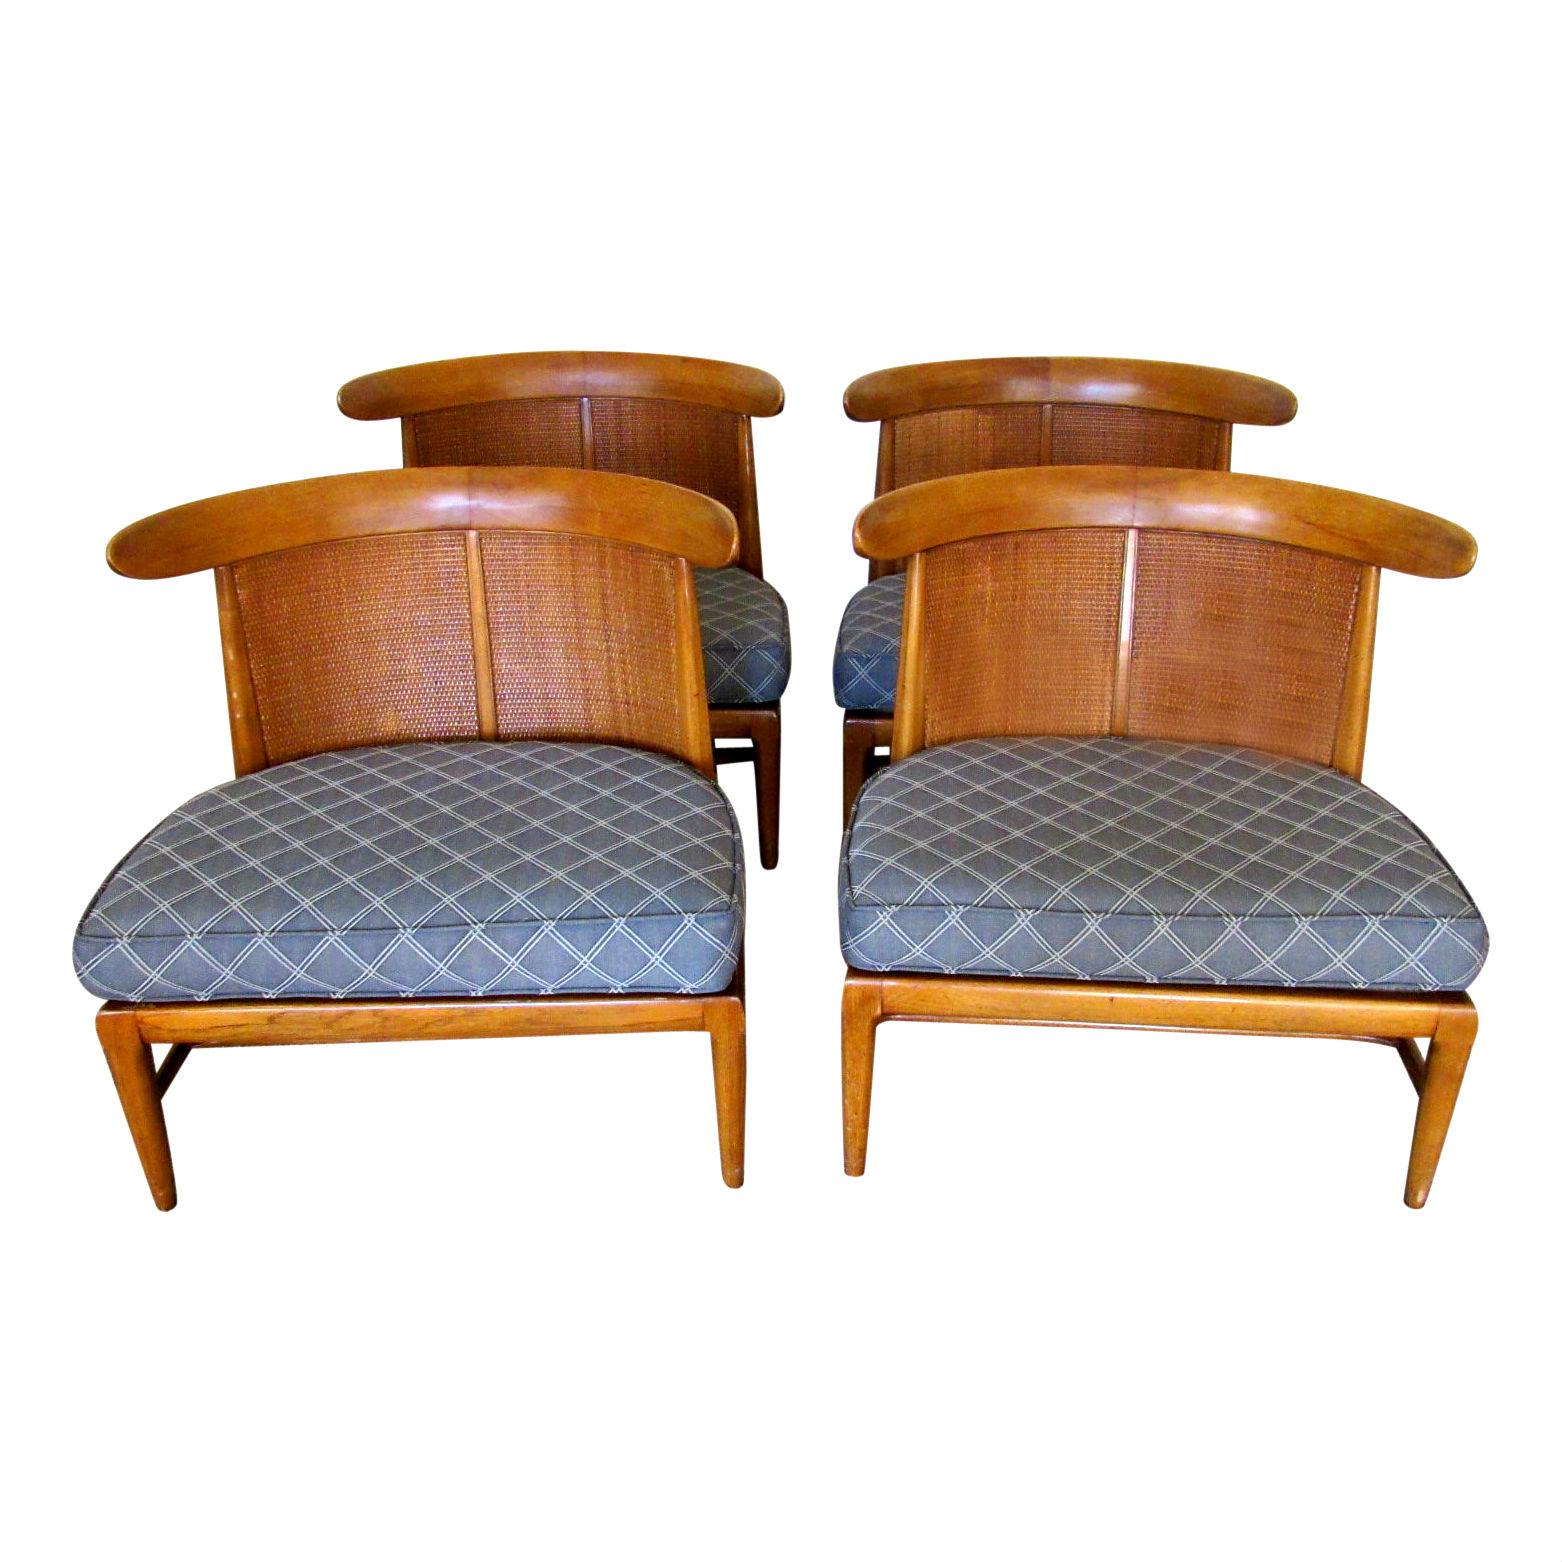 Four Midcentury Tomlinson Sophisticate Slipper Chairs, circa 1956 For Sale 5